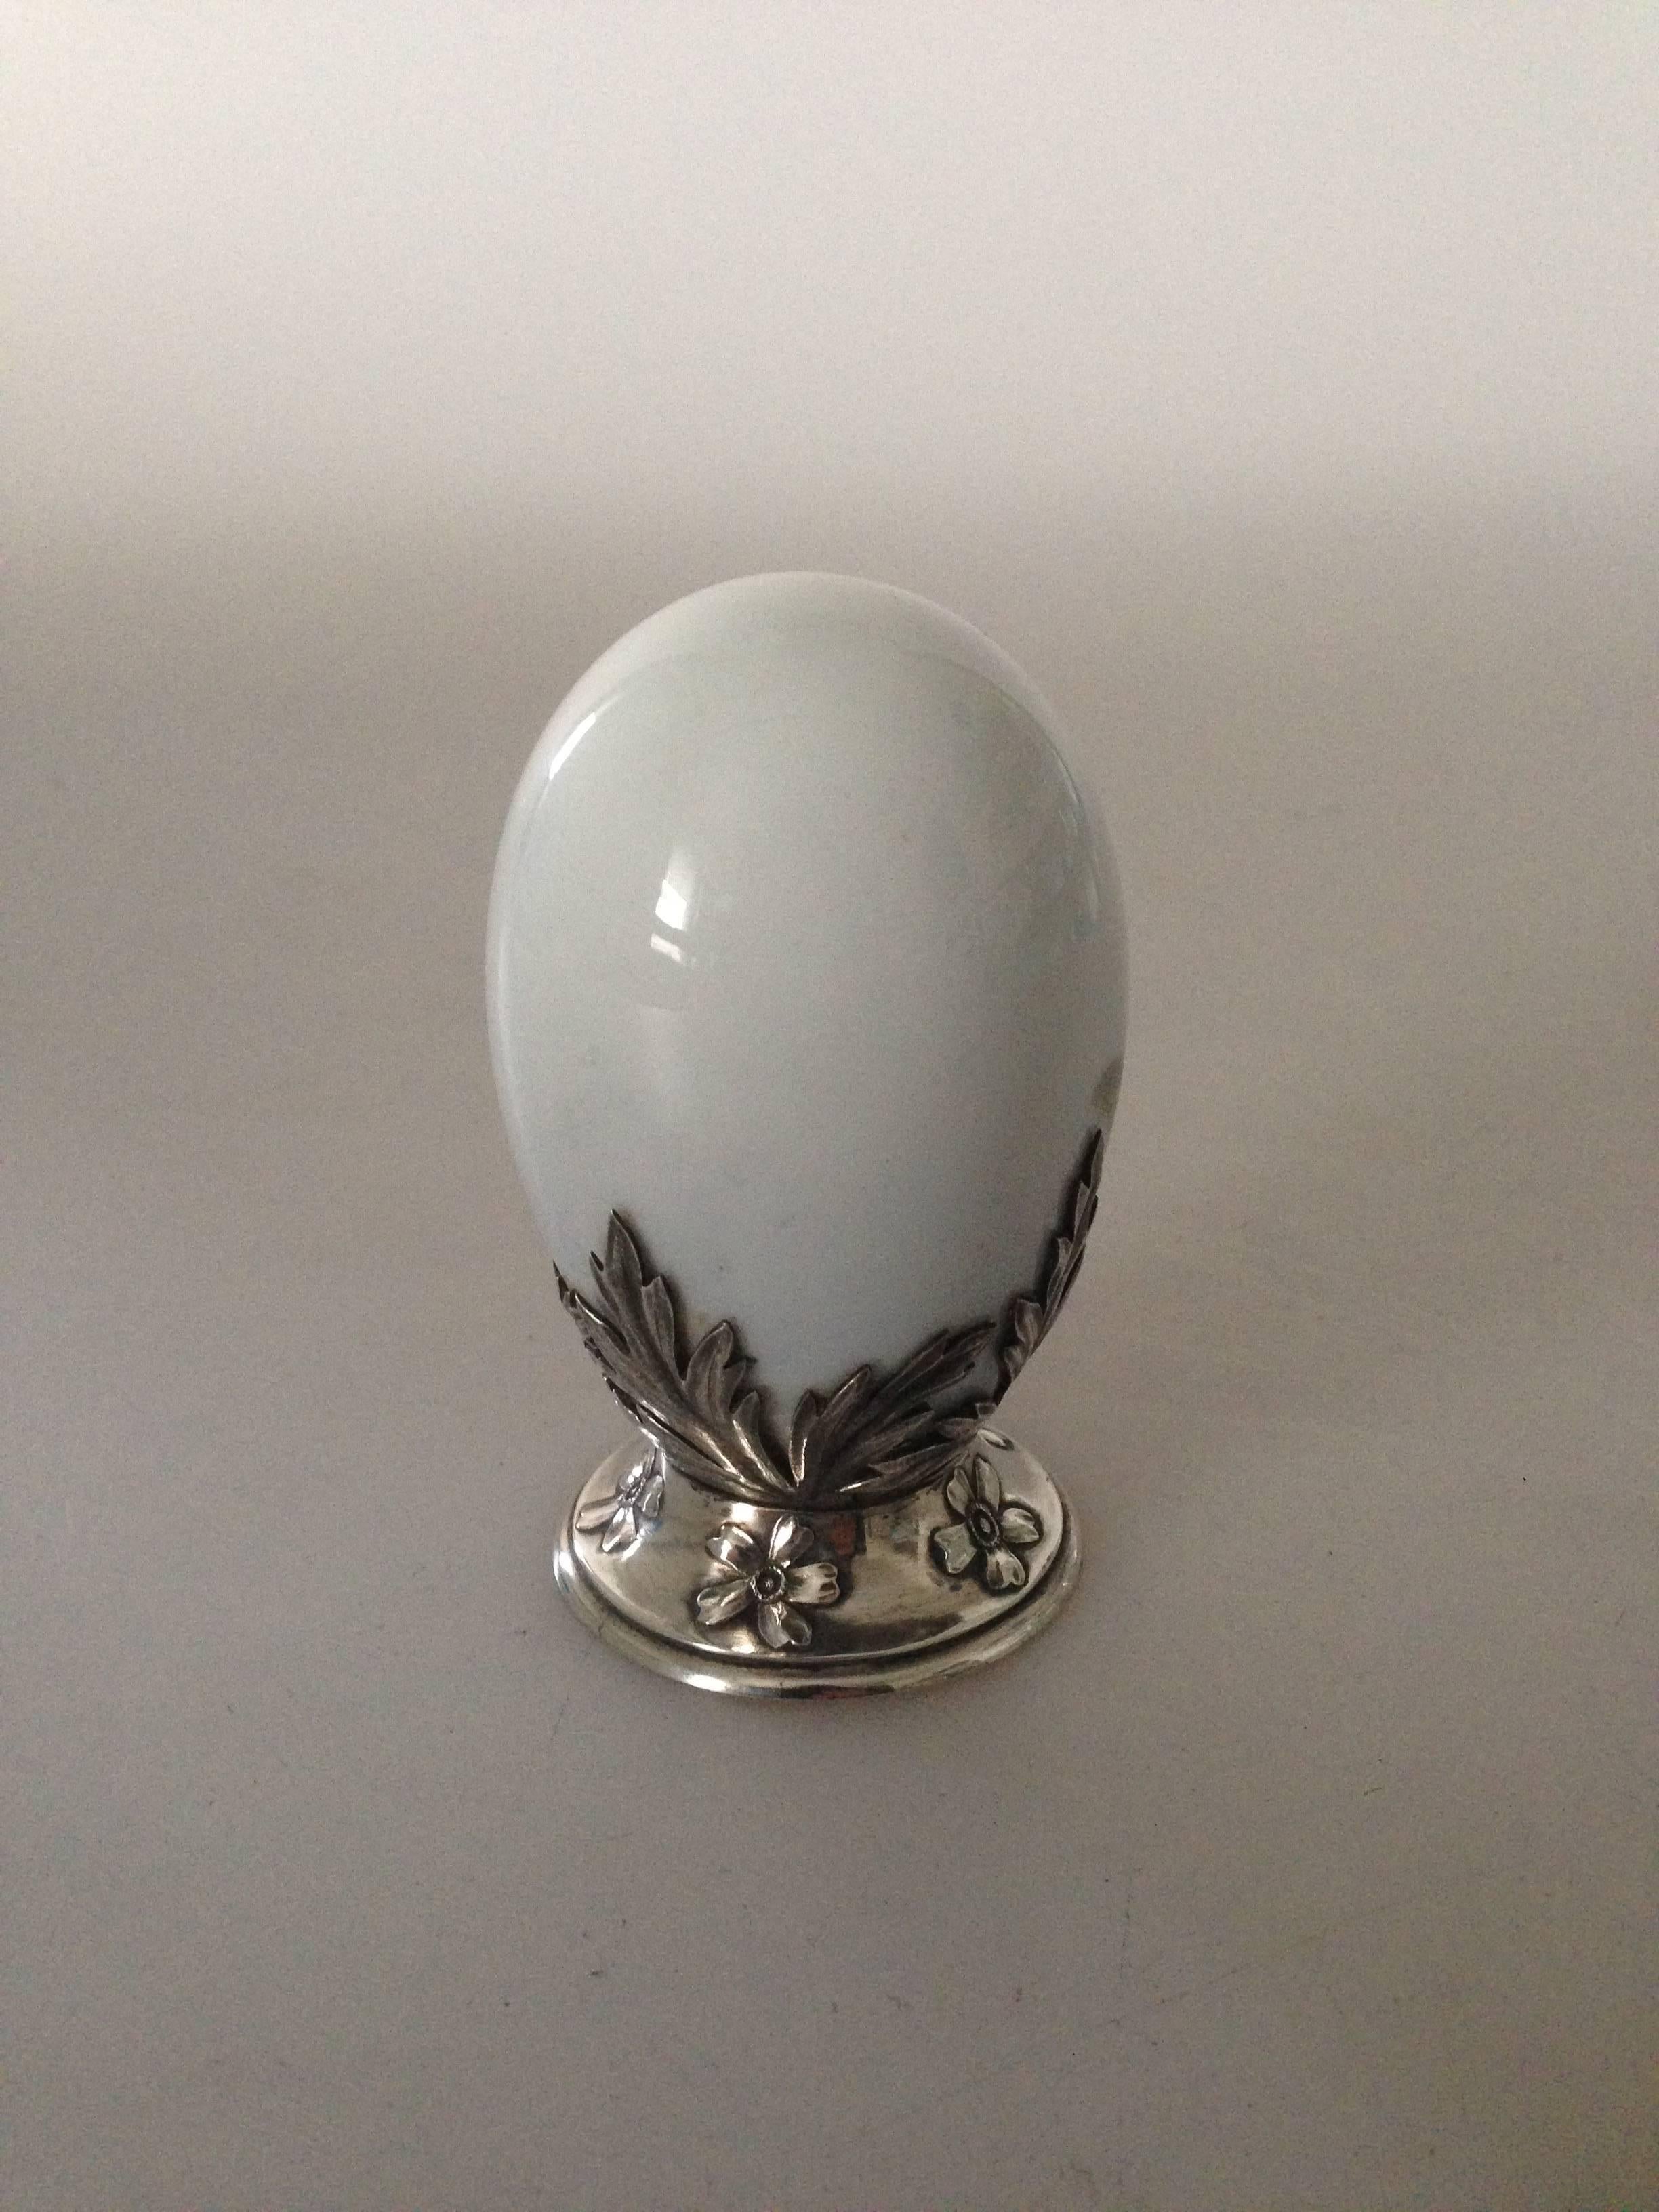 Royal Copenhagen Art Nouveau egg with Anton Michelsen silver mounting from 1902. Also see the other egg we have. 
This is pure luxury.